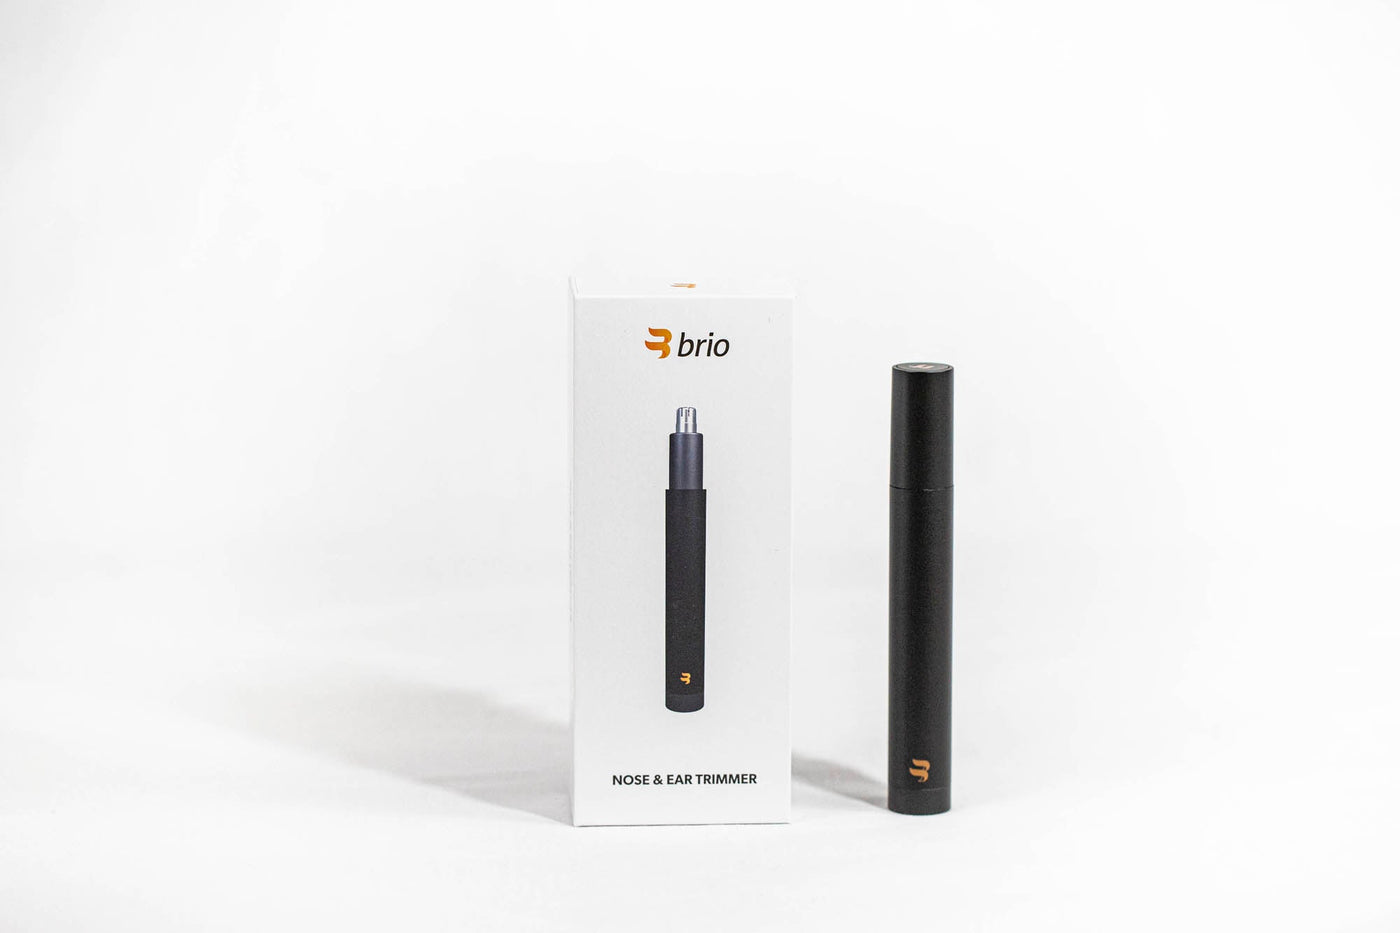 Nose & Ear Trimmer by Brio Product Group